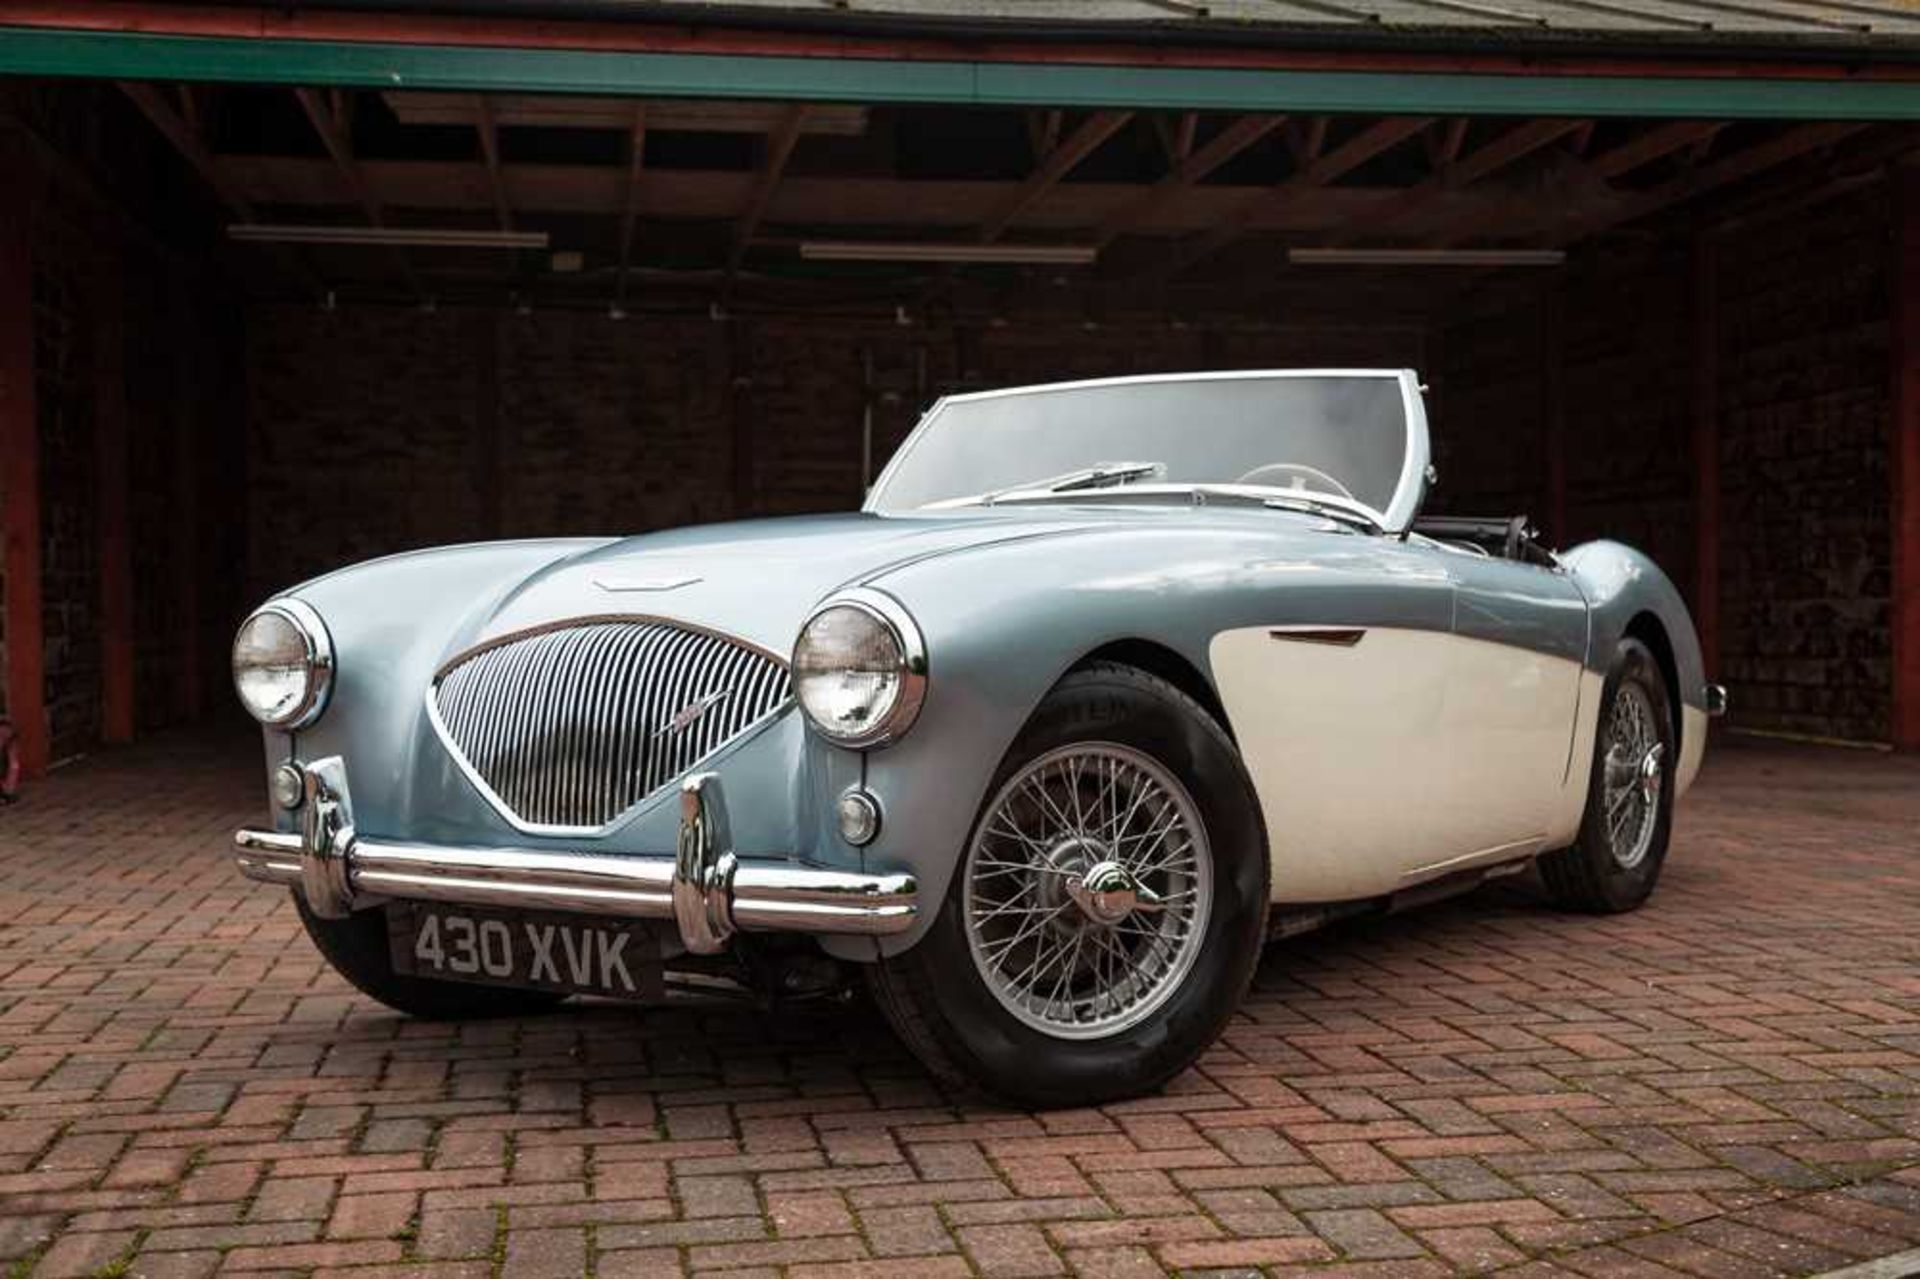 1955 Austin-Healey 100/4 Subtly Upgraded with 5-Speed Transmission and Front Disc Brakes - Image 20 of 54